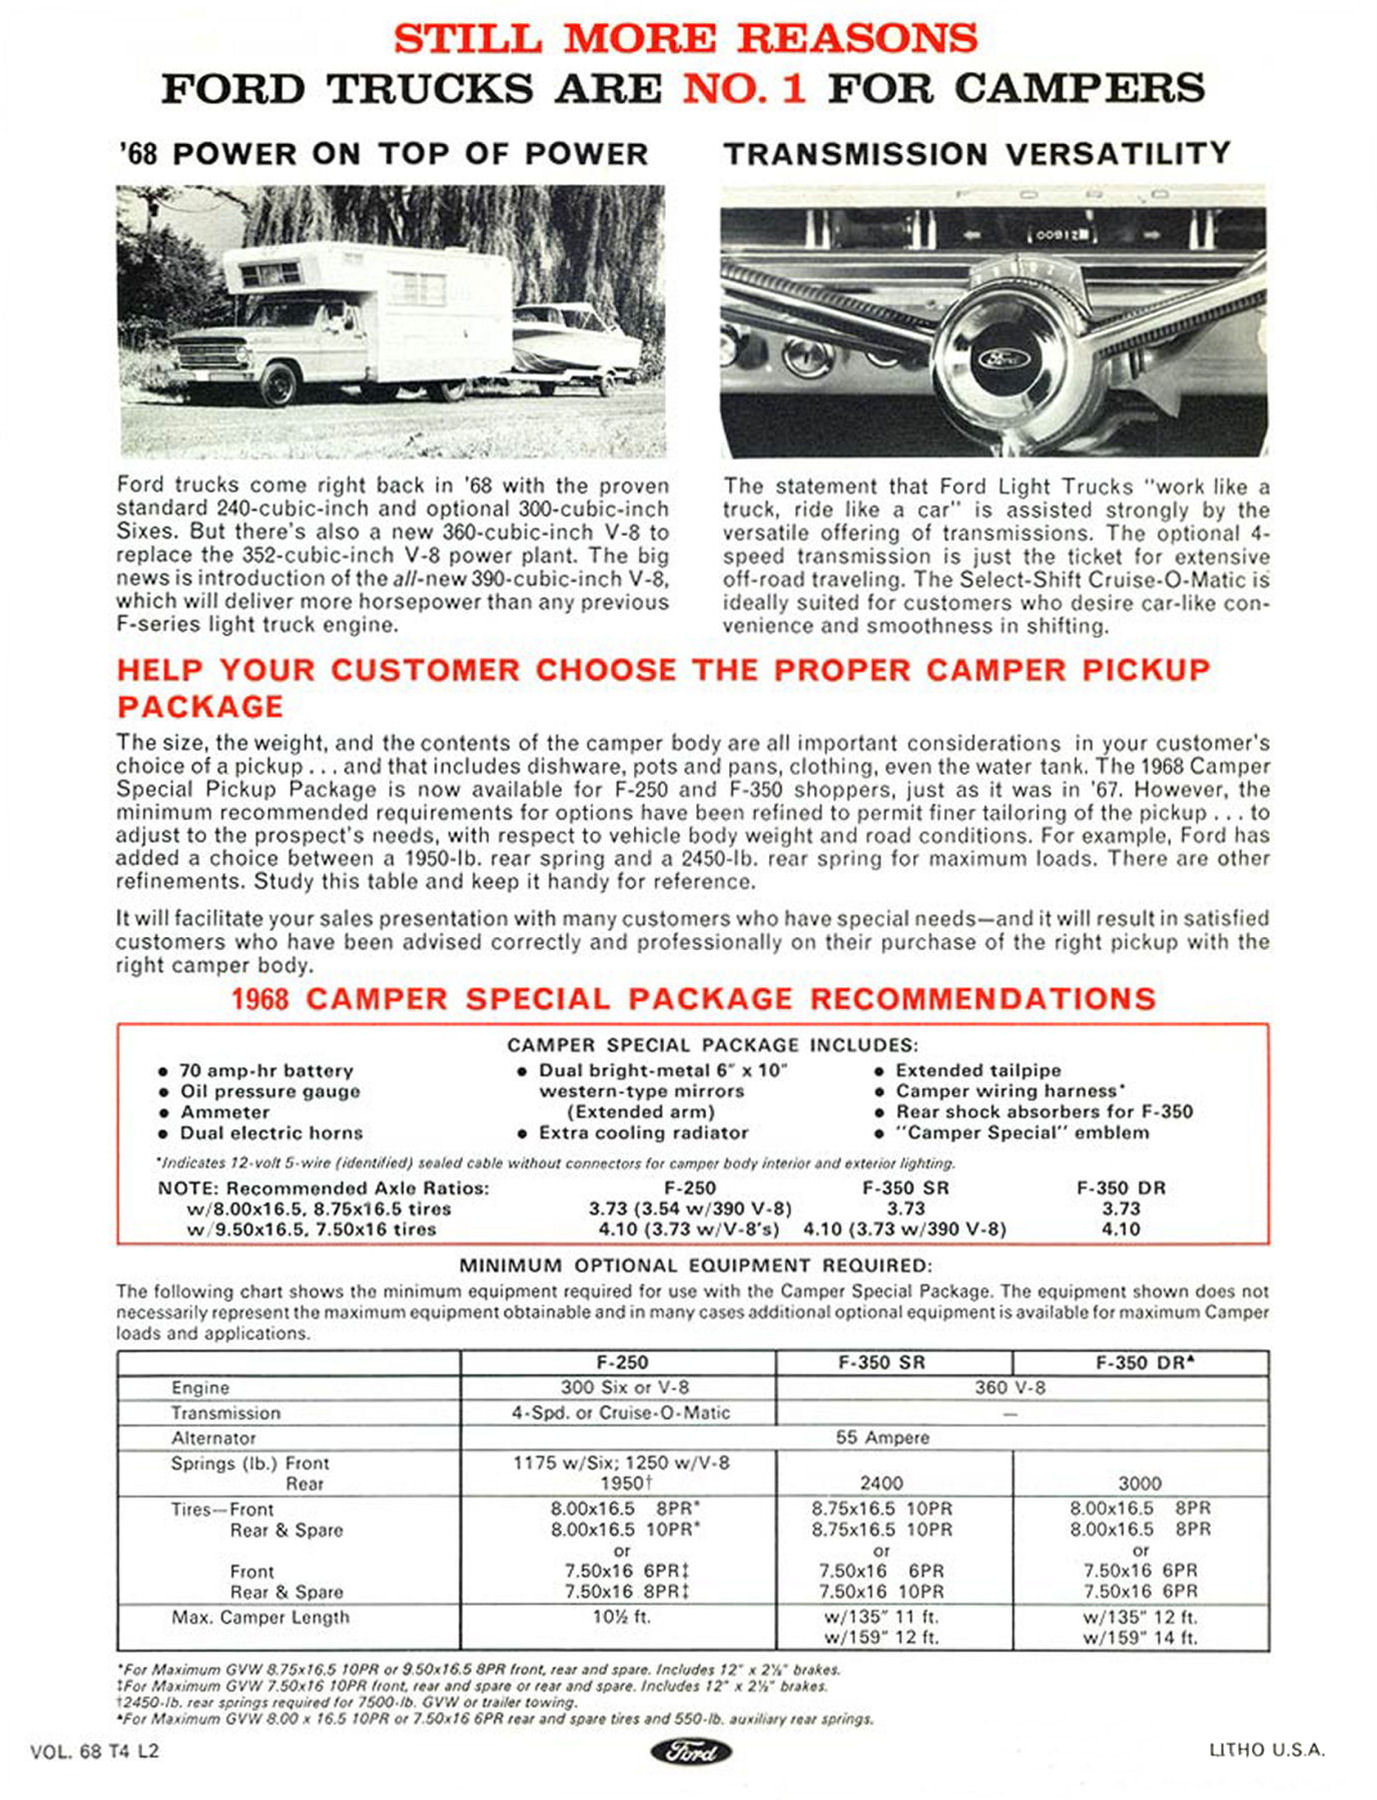 1968 Ford Pickup Camper Sales Features-04